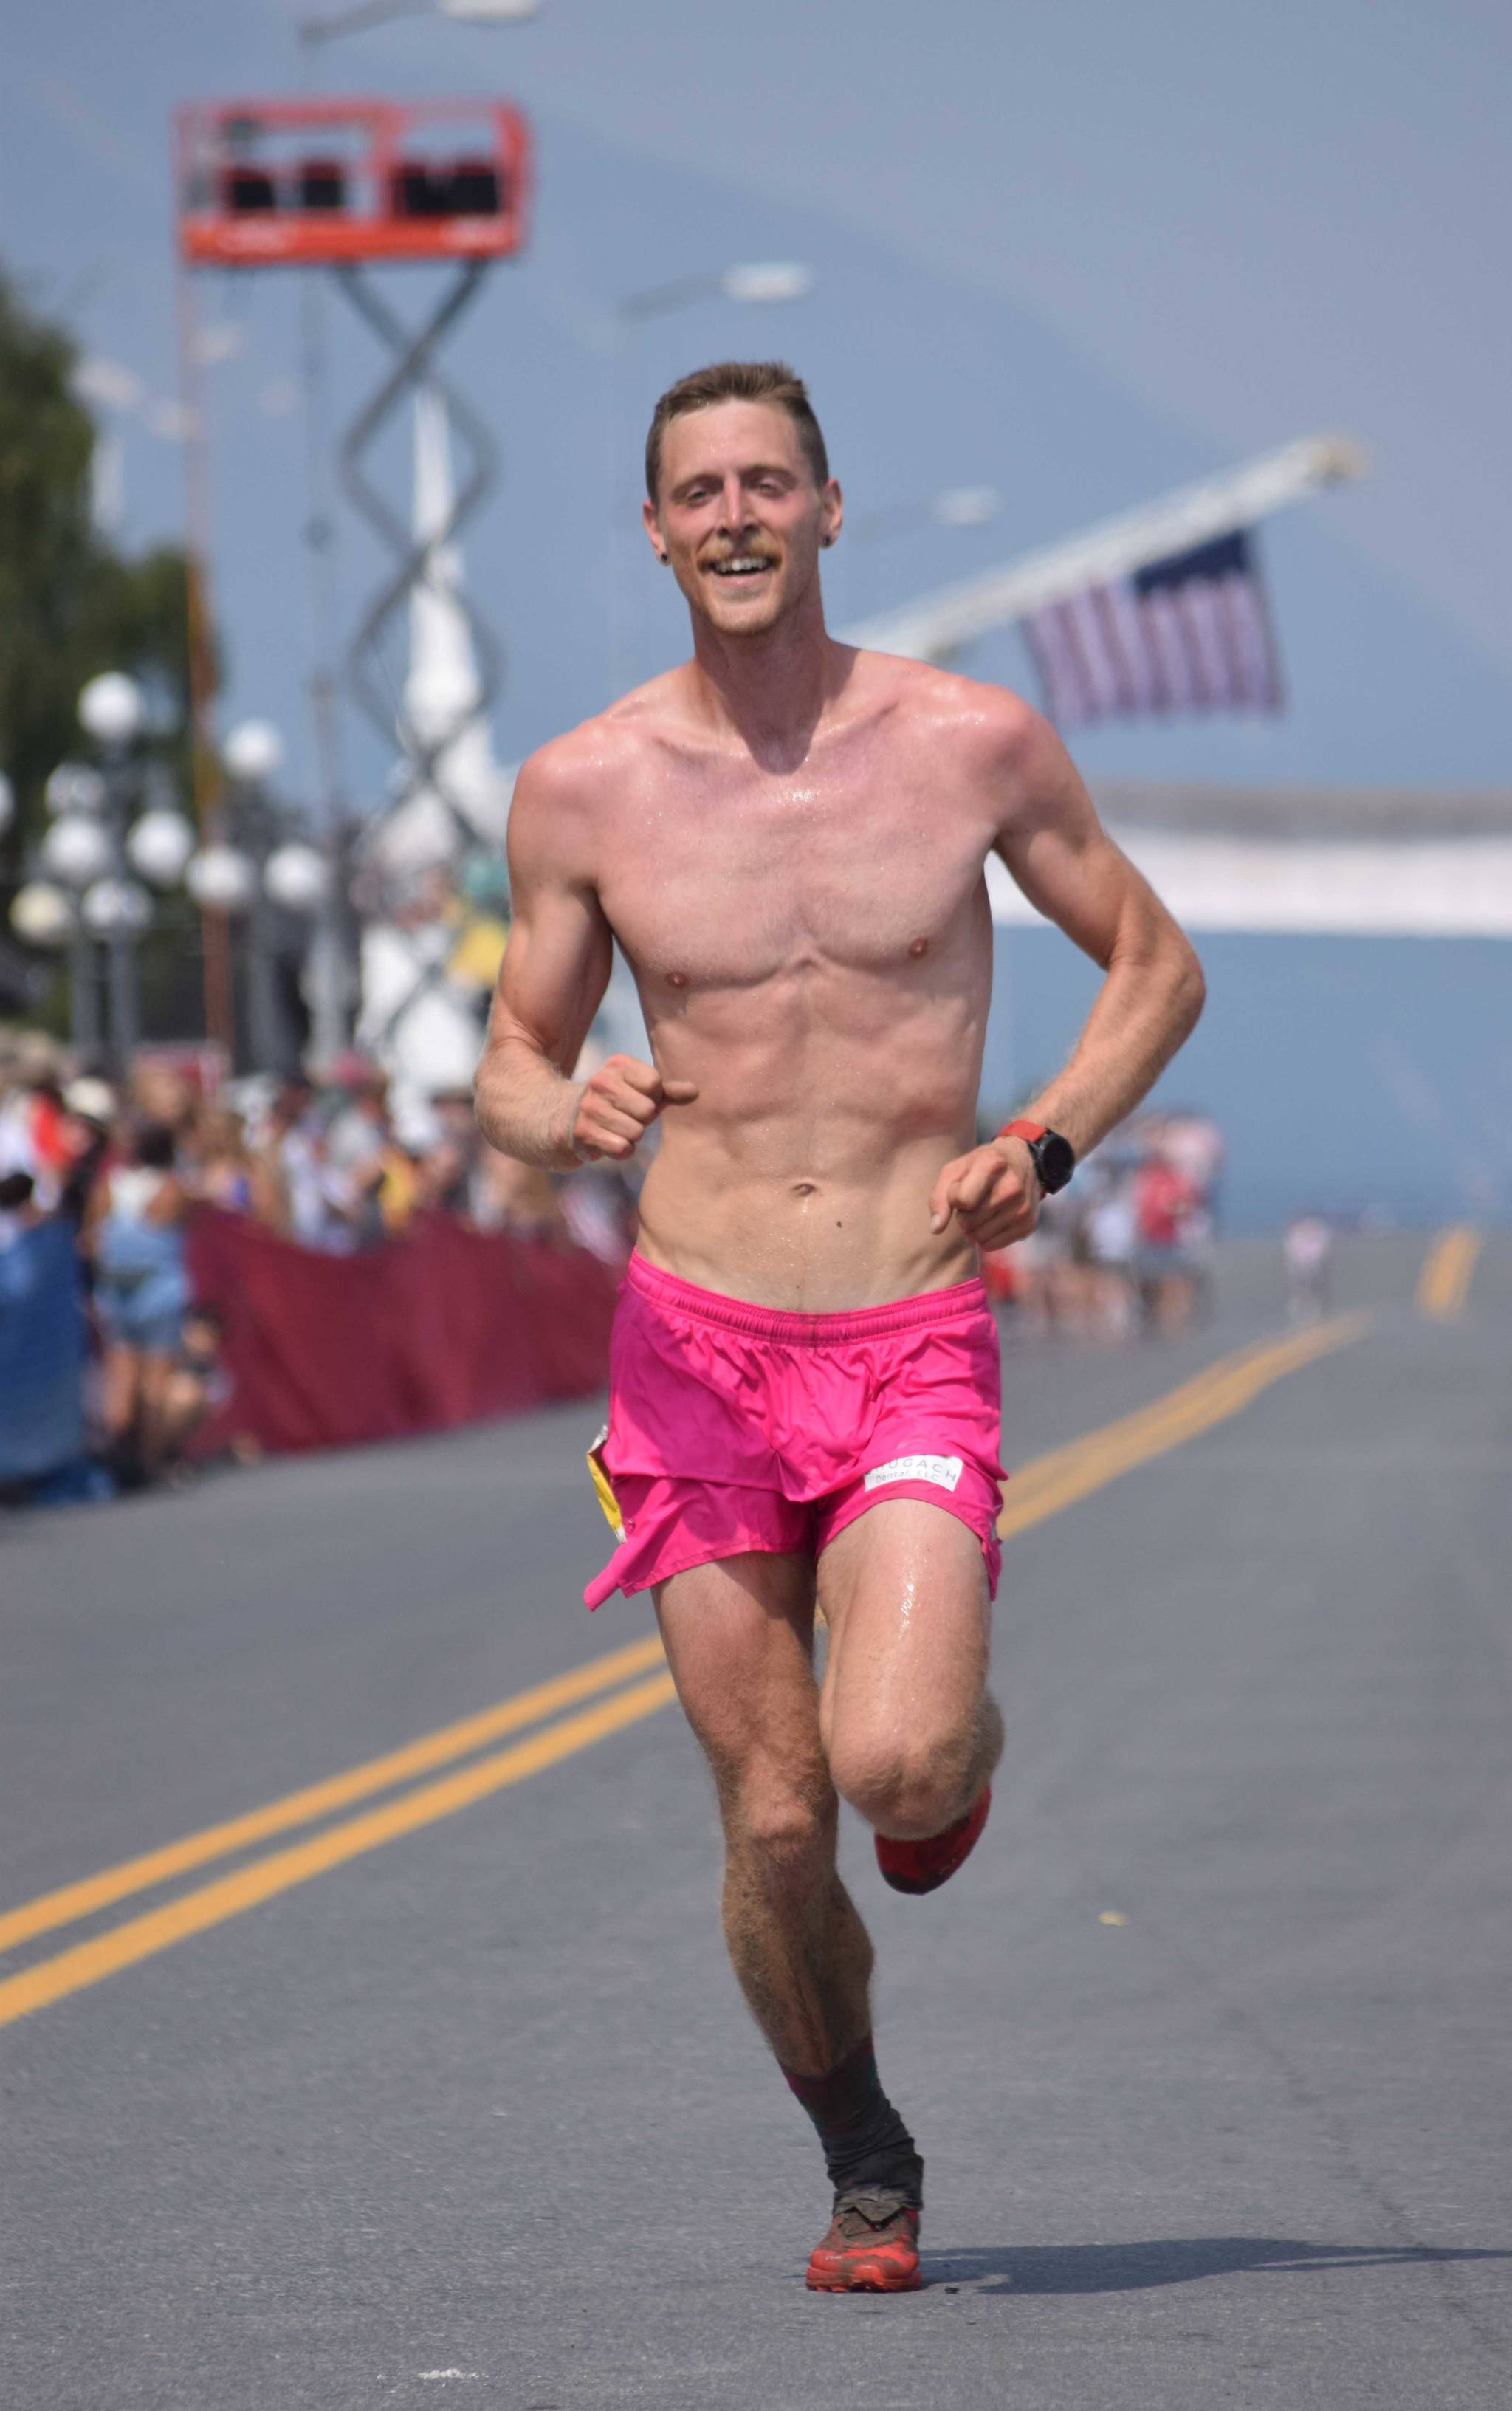 Anchorage’s Lars Arneson, a 2009 graduate of Cook Inlet Academy, finishes third in the men’s Mount Marathon Race on Thursday, July 4, 2019, in Seward, Alaska. (Photo by Jeff Helminiak/Peninsula Clarion)